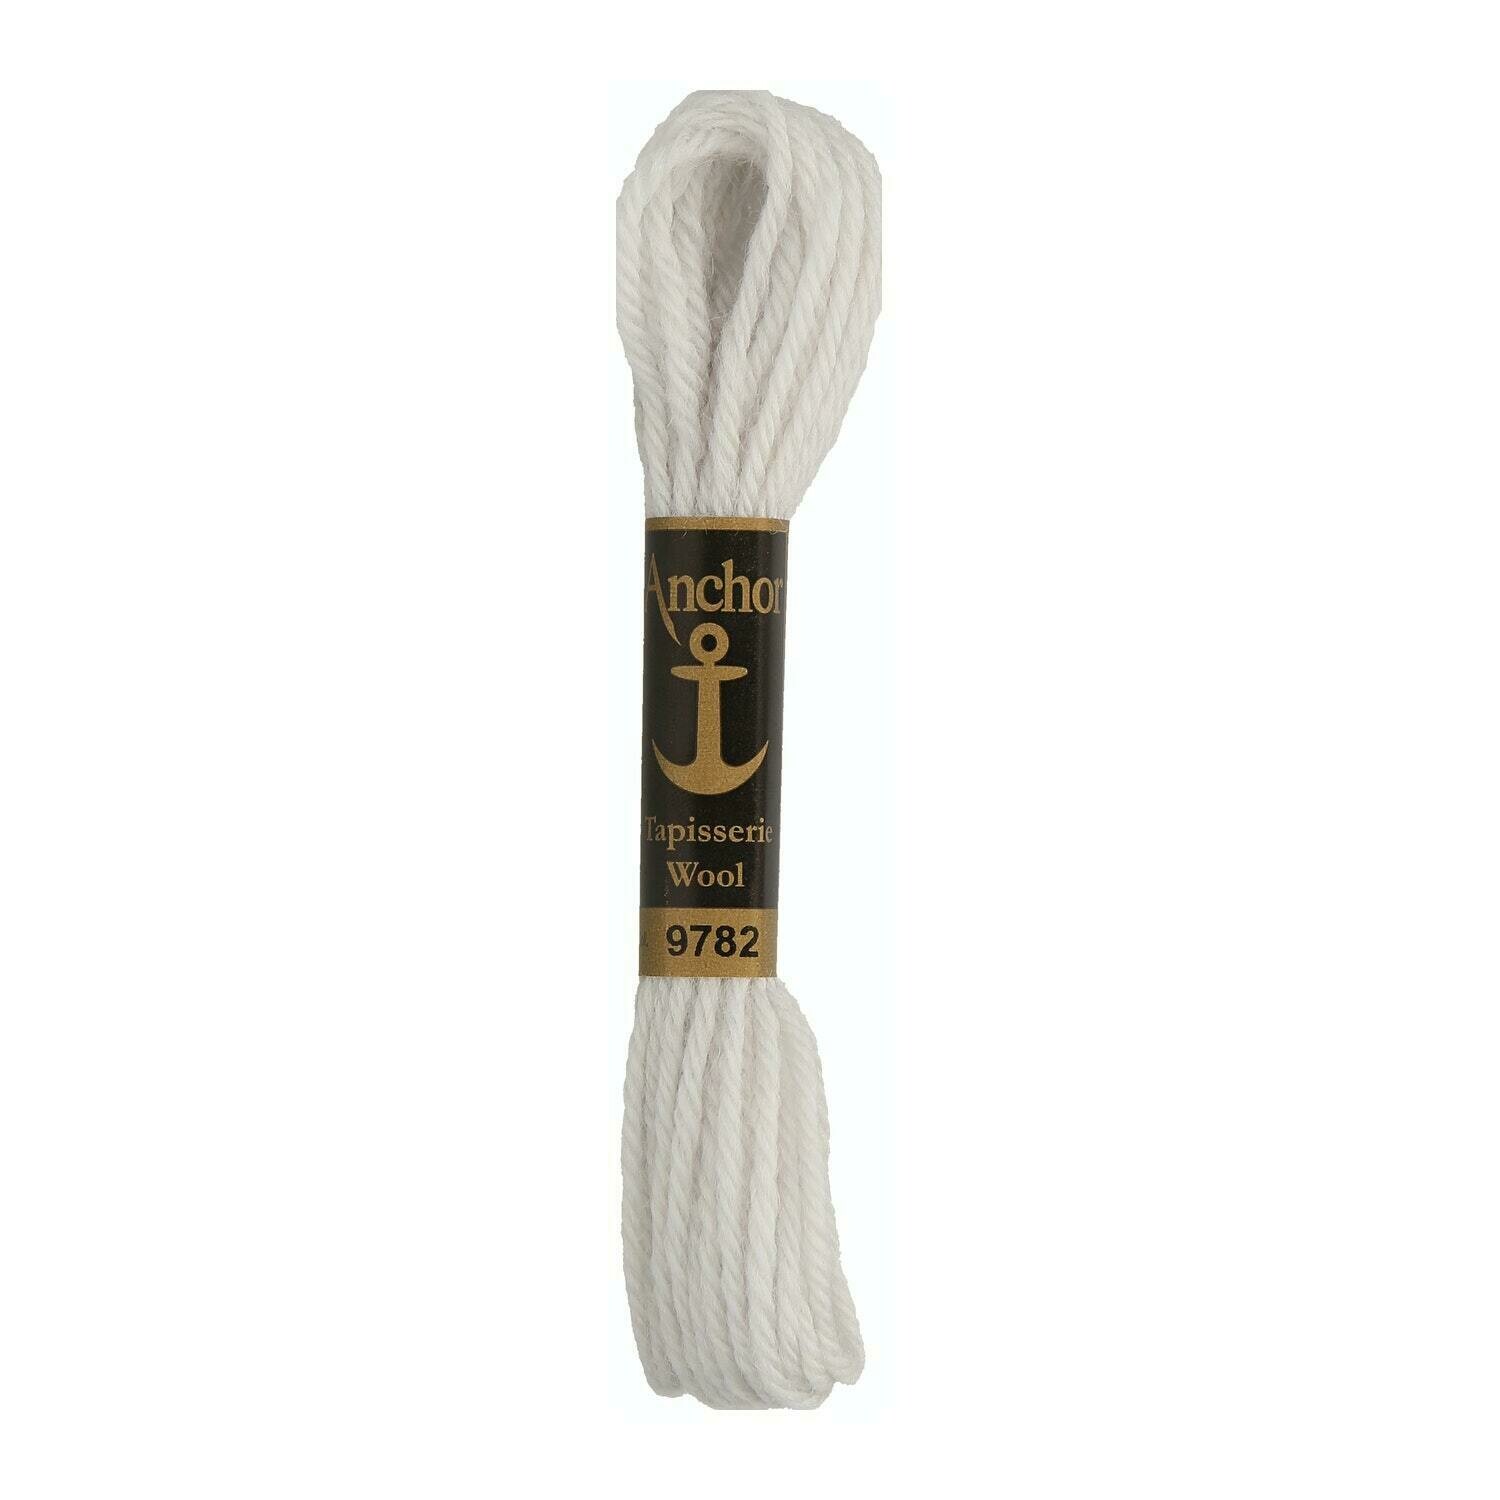 Anchor Tapisserie Wool #09782